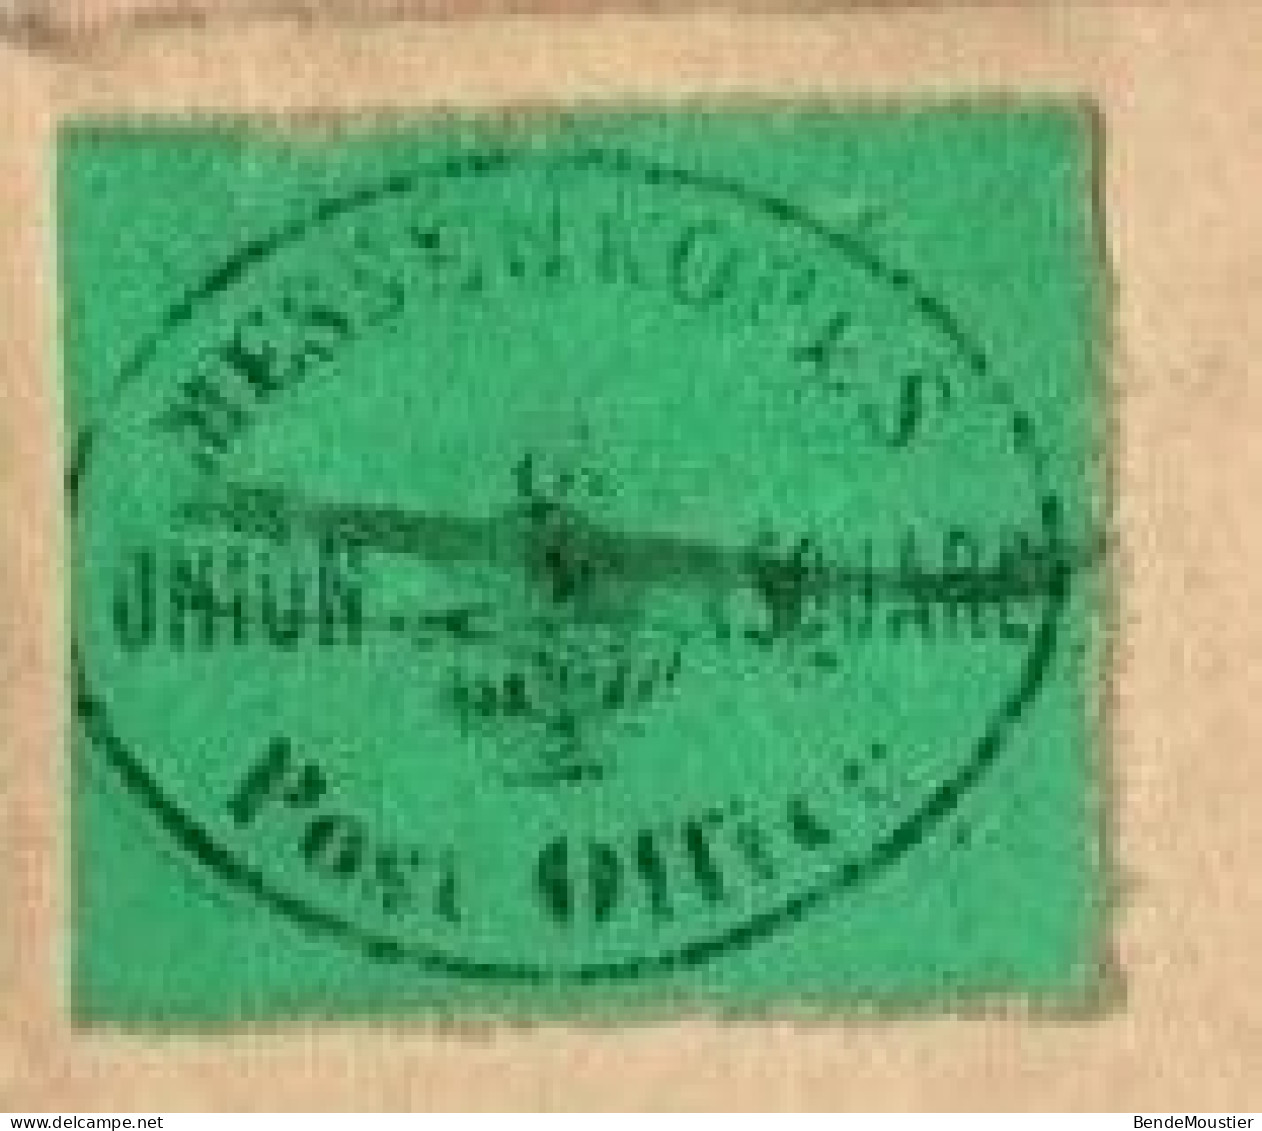 (R122) SCOTT # 106 L1  (L217) - Black On Green - Red Handstamp - Messenkope's Union Square Post Office - 1849. - Sellos Locales